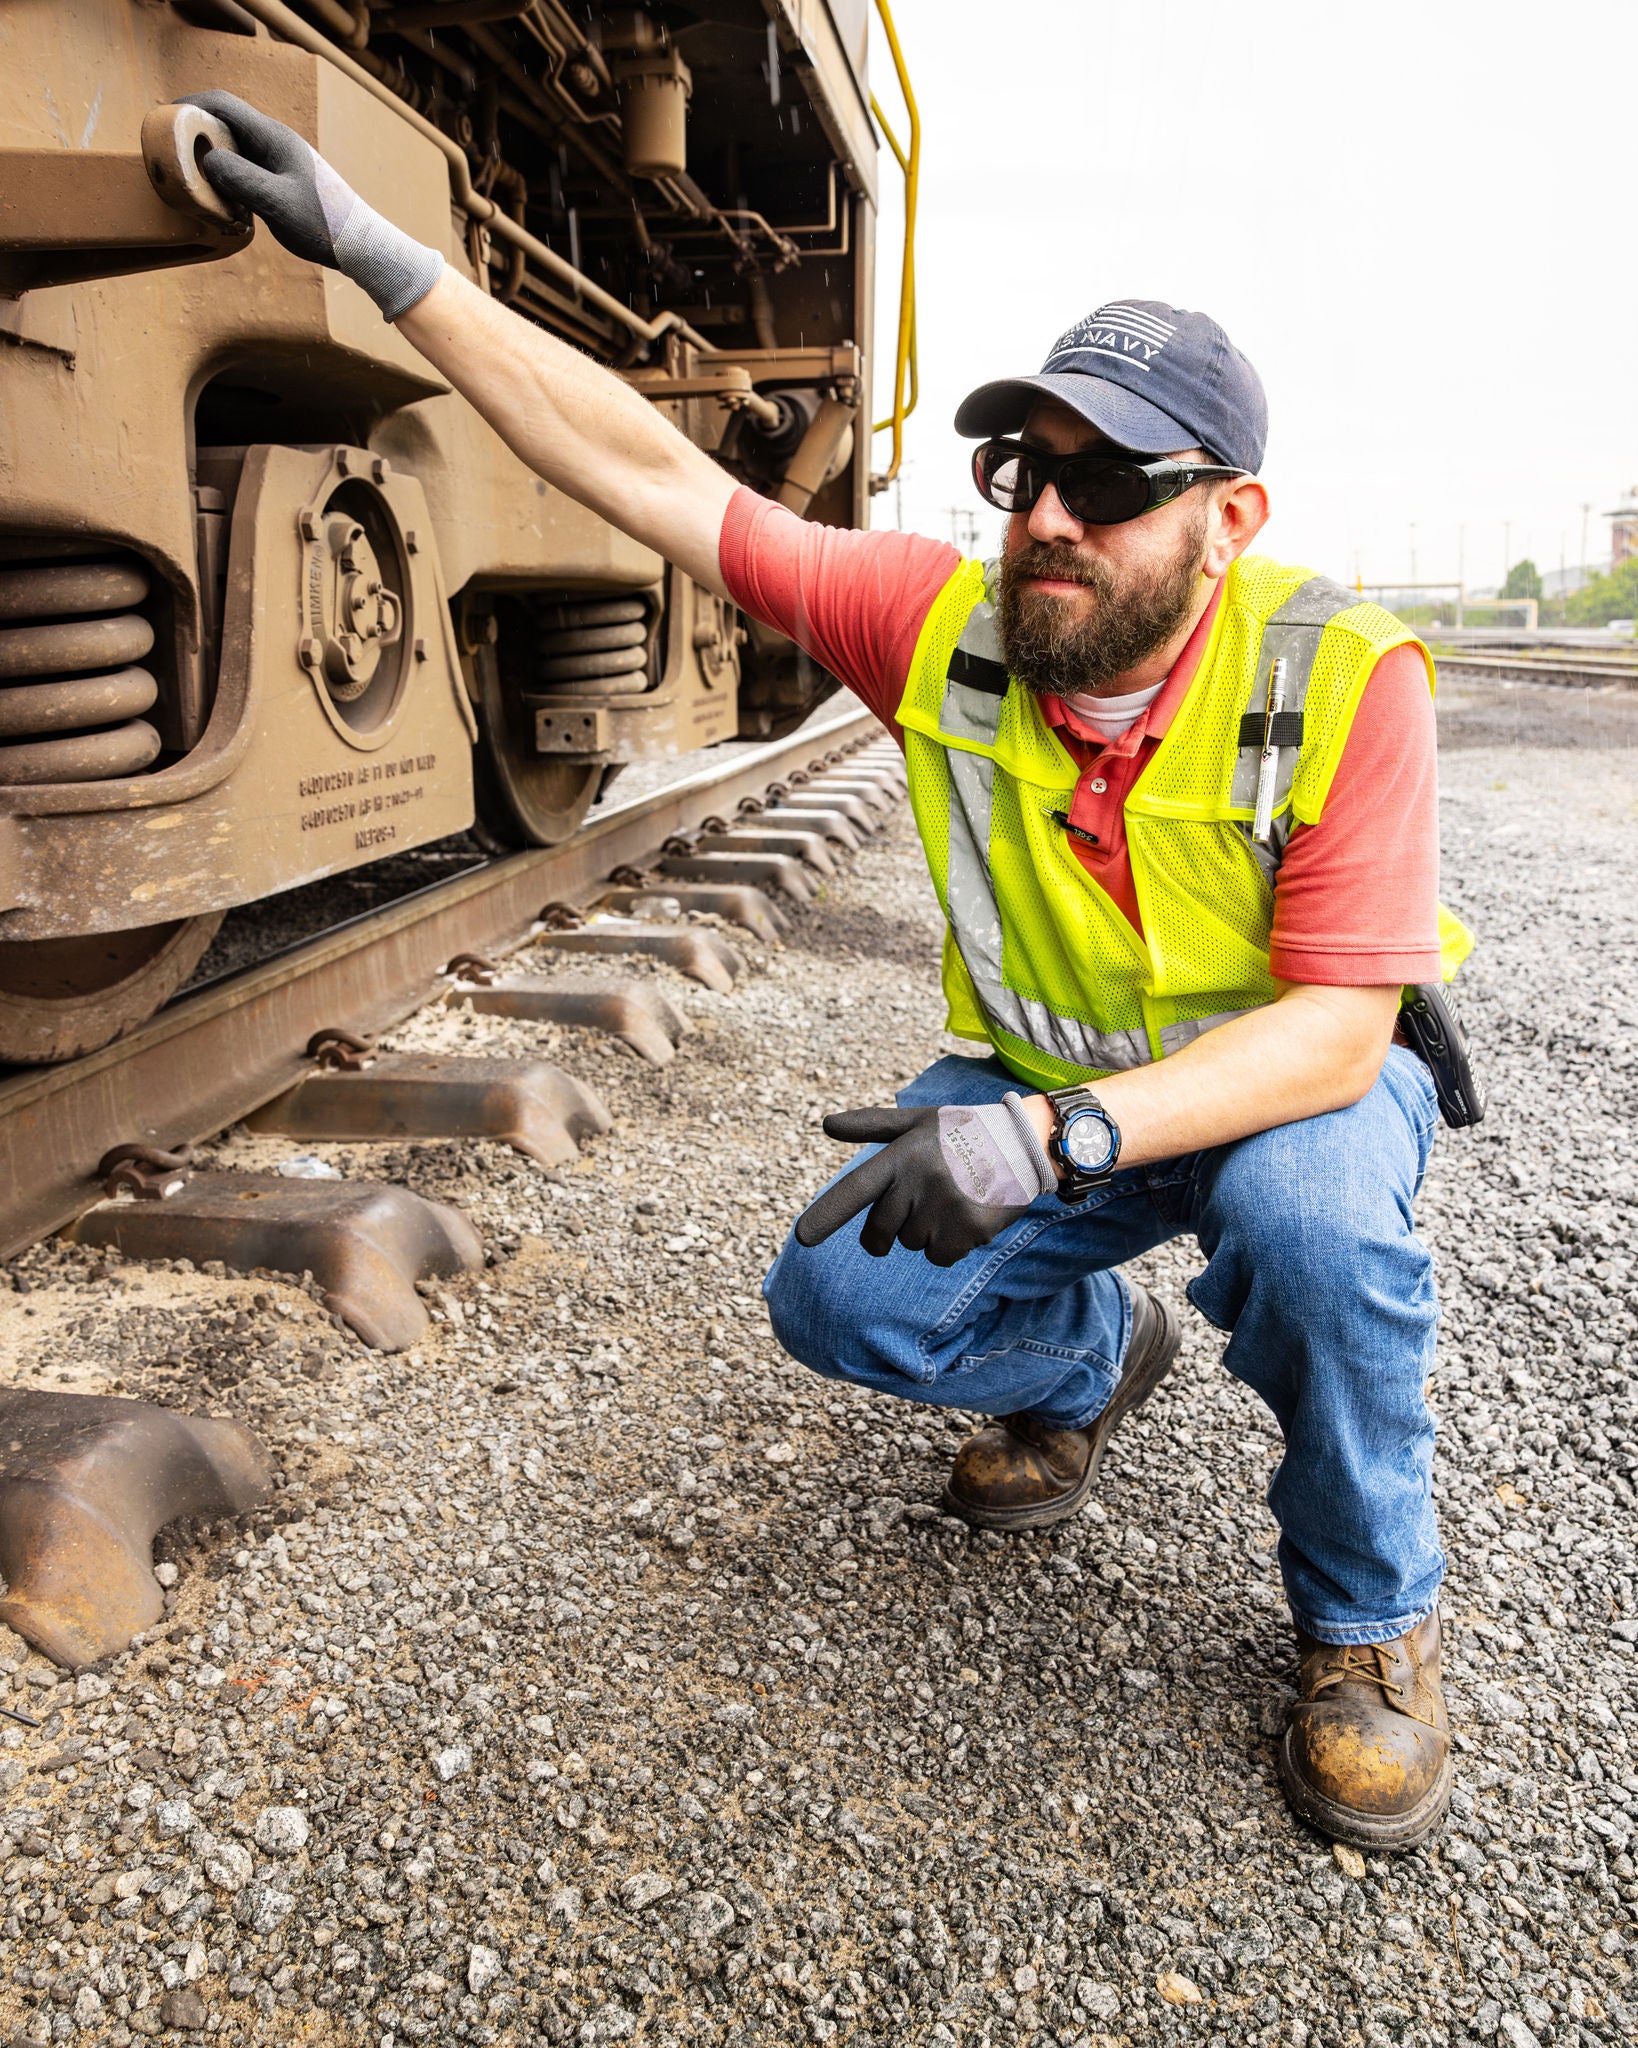 Norfolk Southern railroad employee in the transportation industry inspecting a train